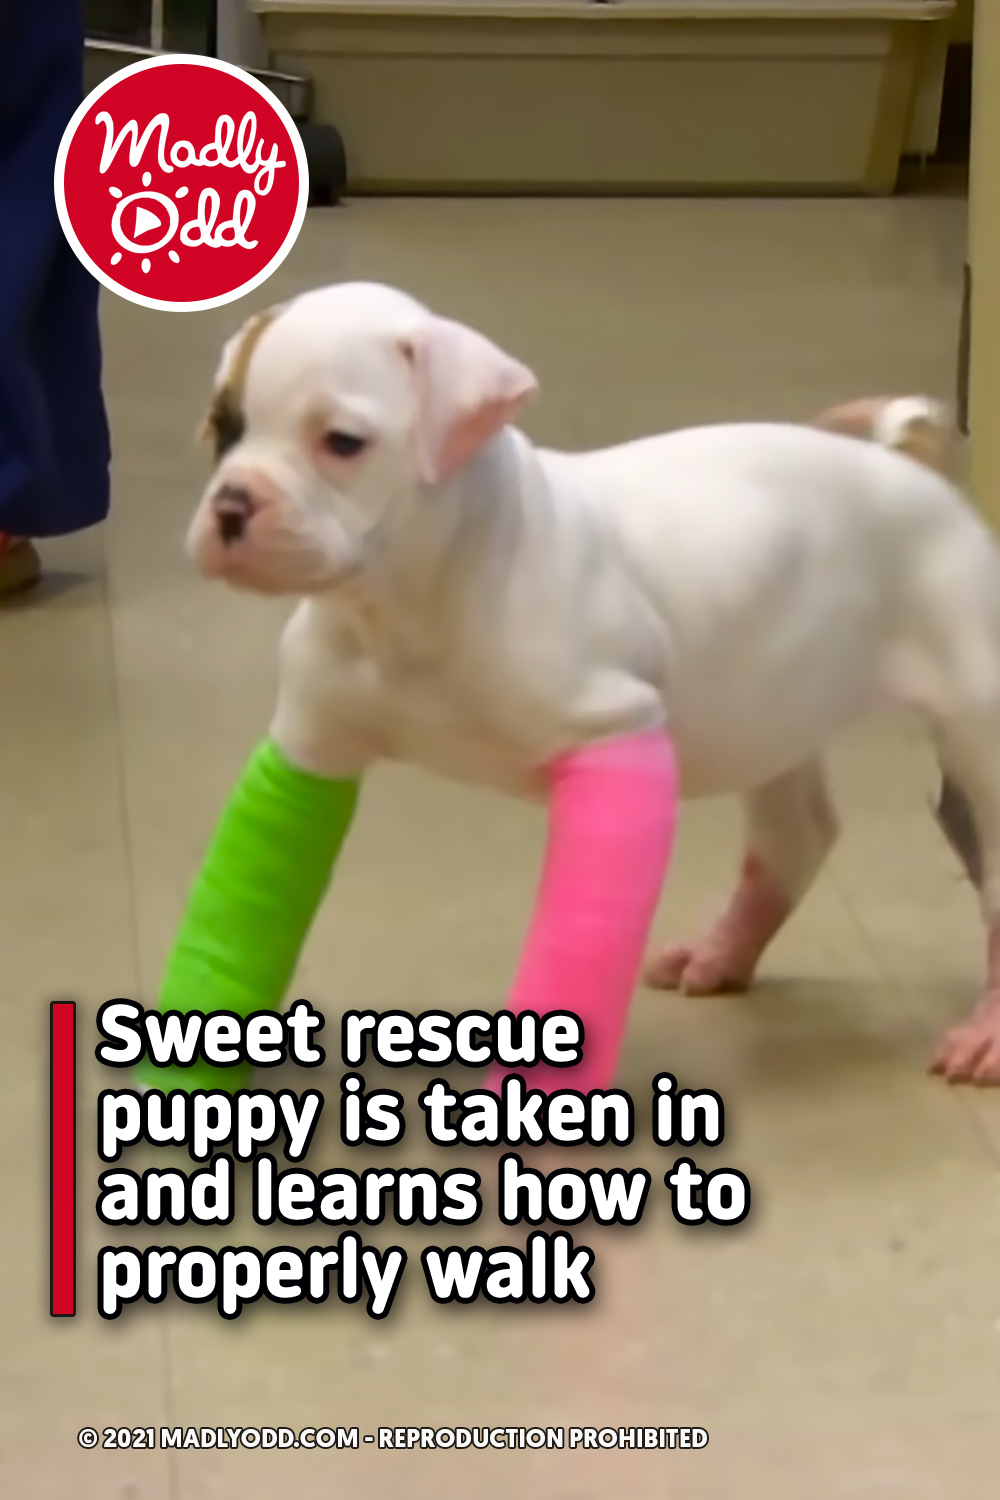 Sweet rescue puppy is taken in and learns how to properly walk